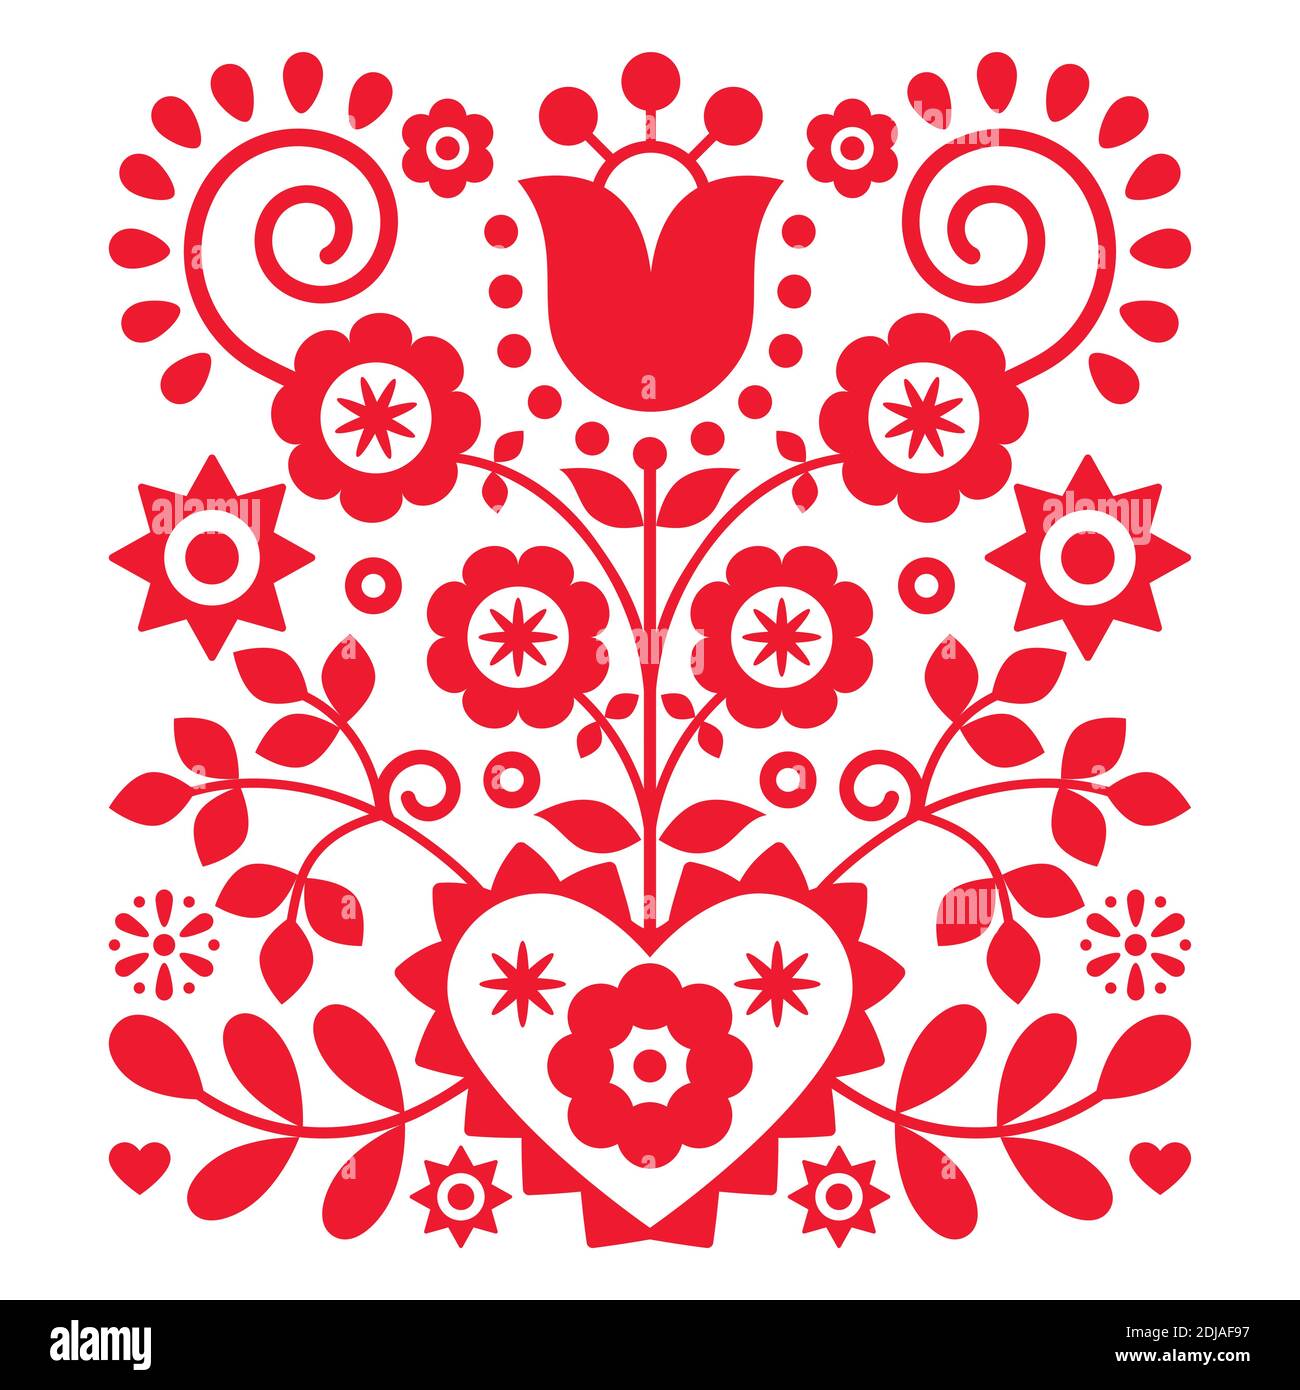 Floral folk art vector design from Nowy Sacz in Poland inspired by traditional highlanders embroidery Lachy Sadeckie Stock Vector